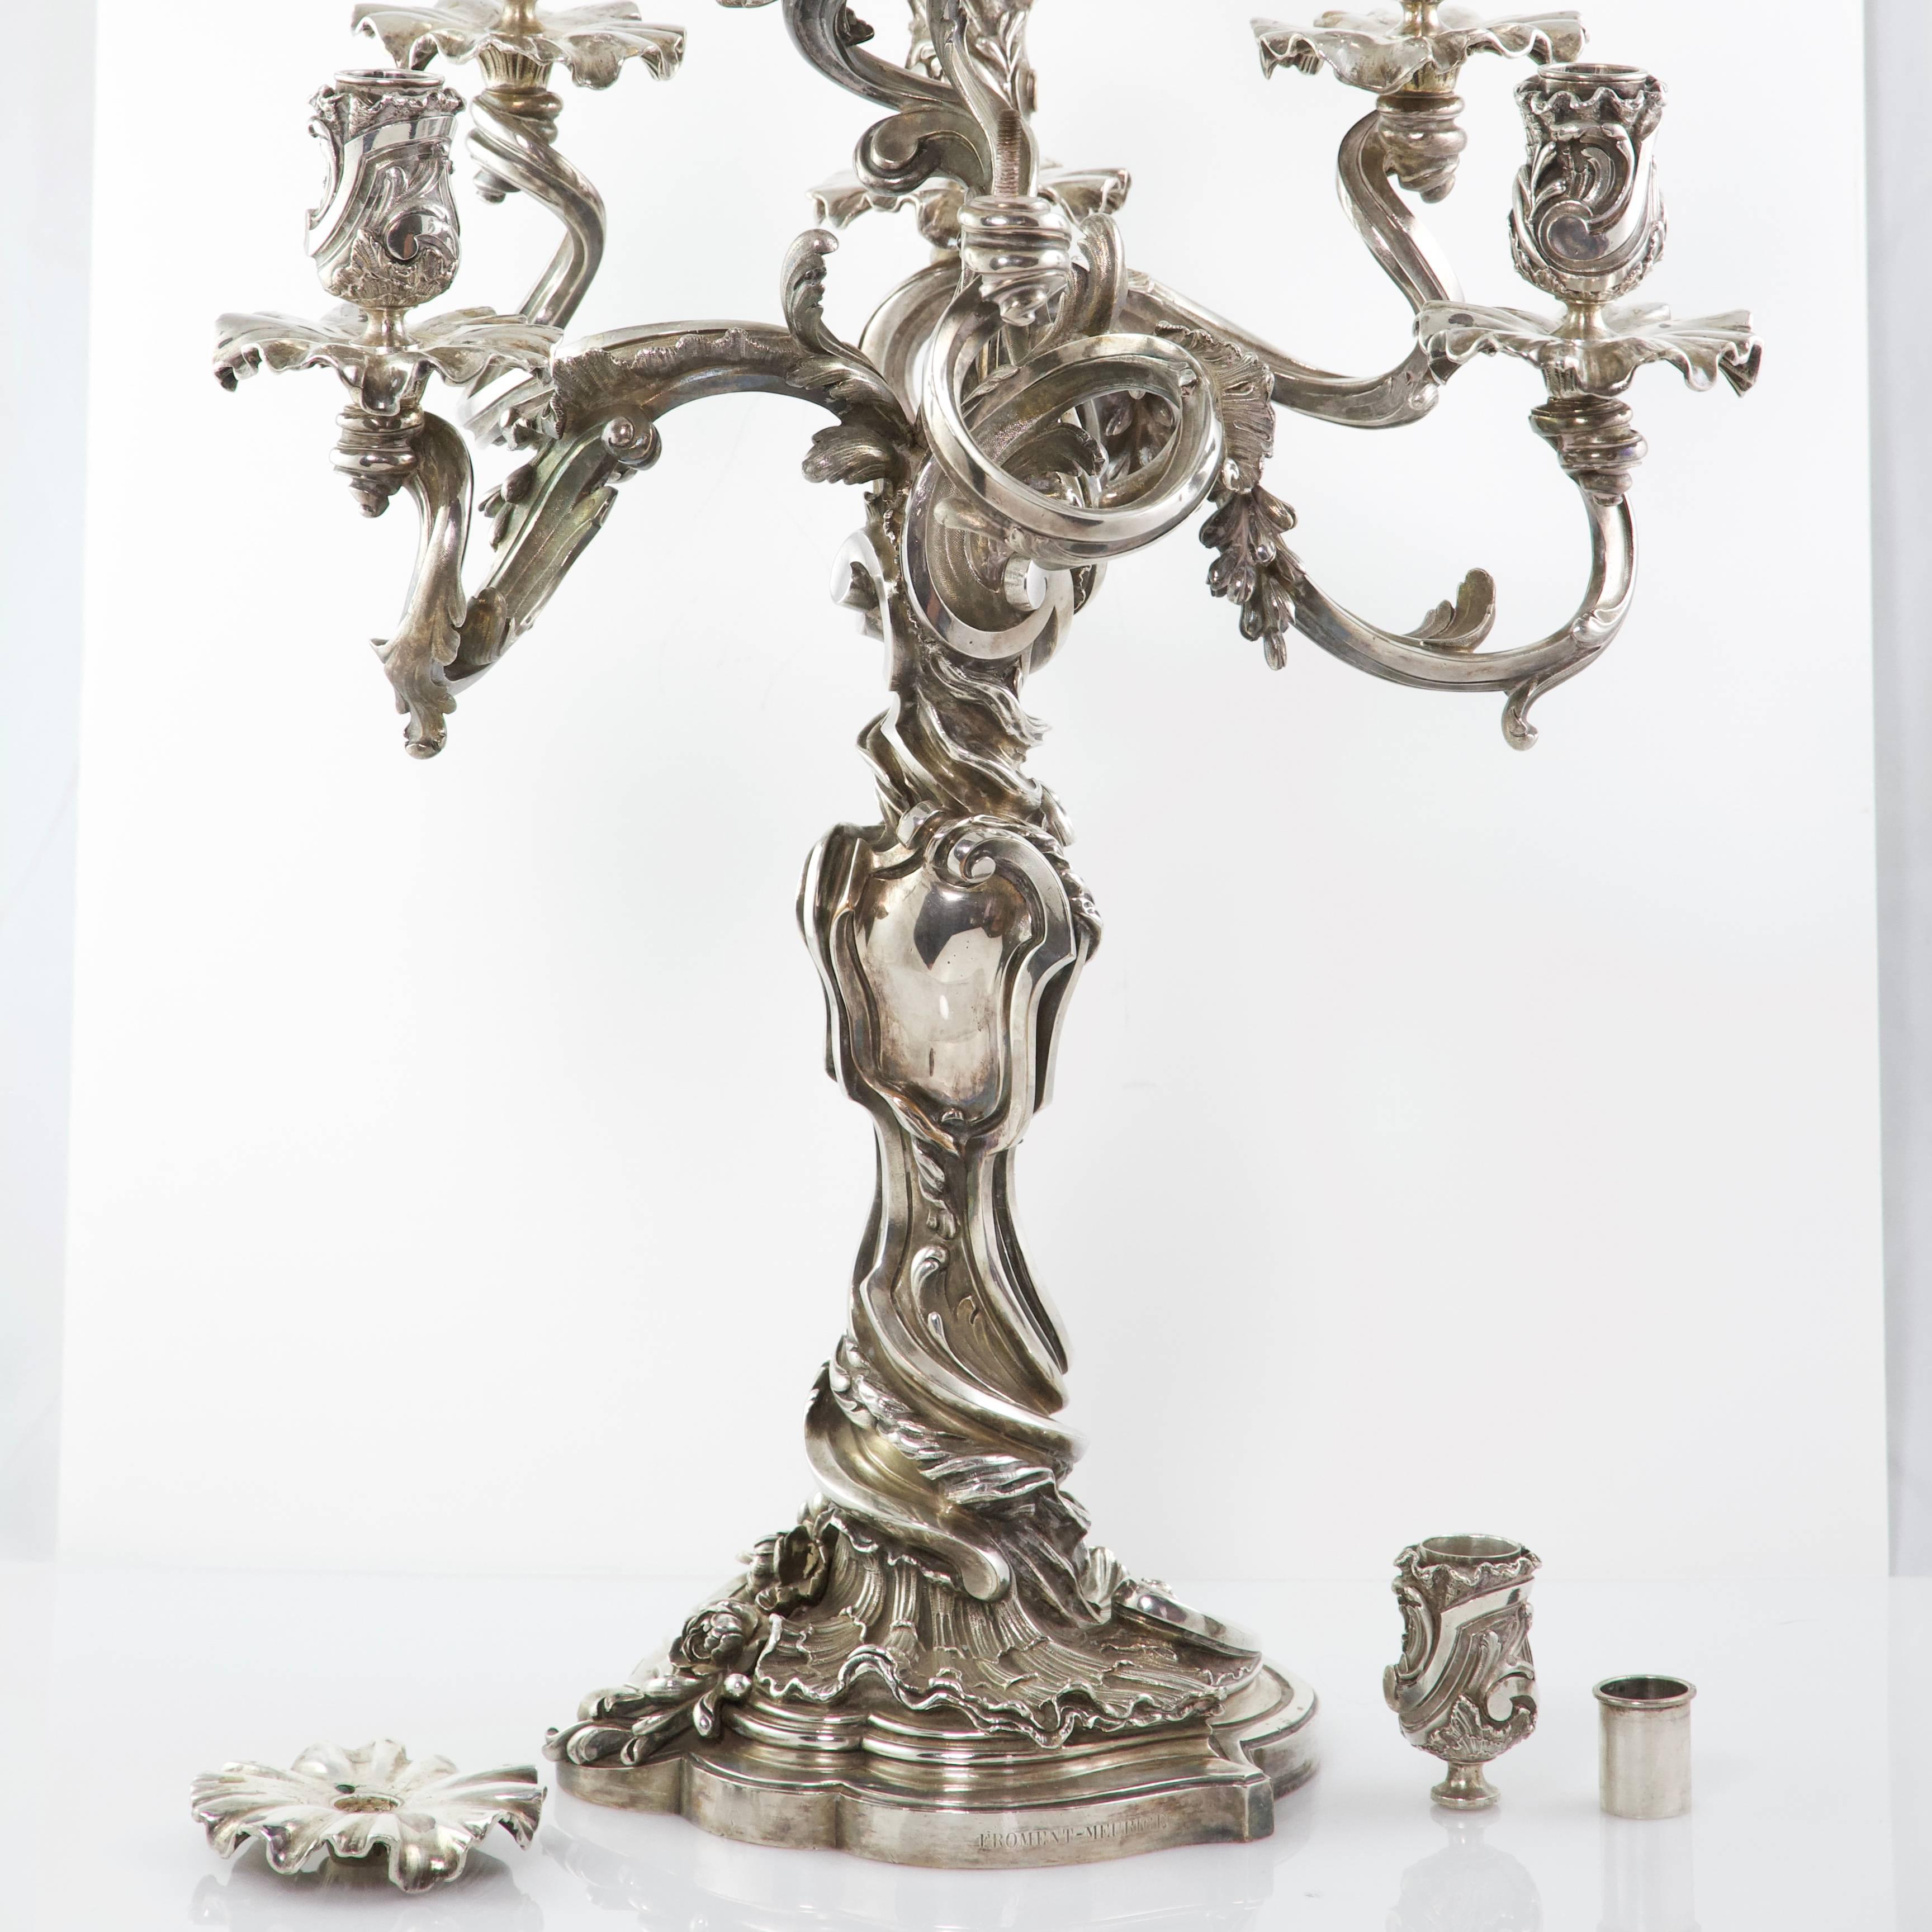 Rococo 19th Century Froment-Meurice Bronze and Silver Pair of Candelabras from Paris For Sale